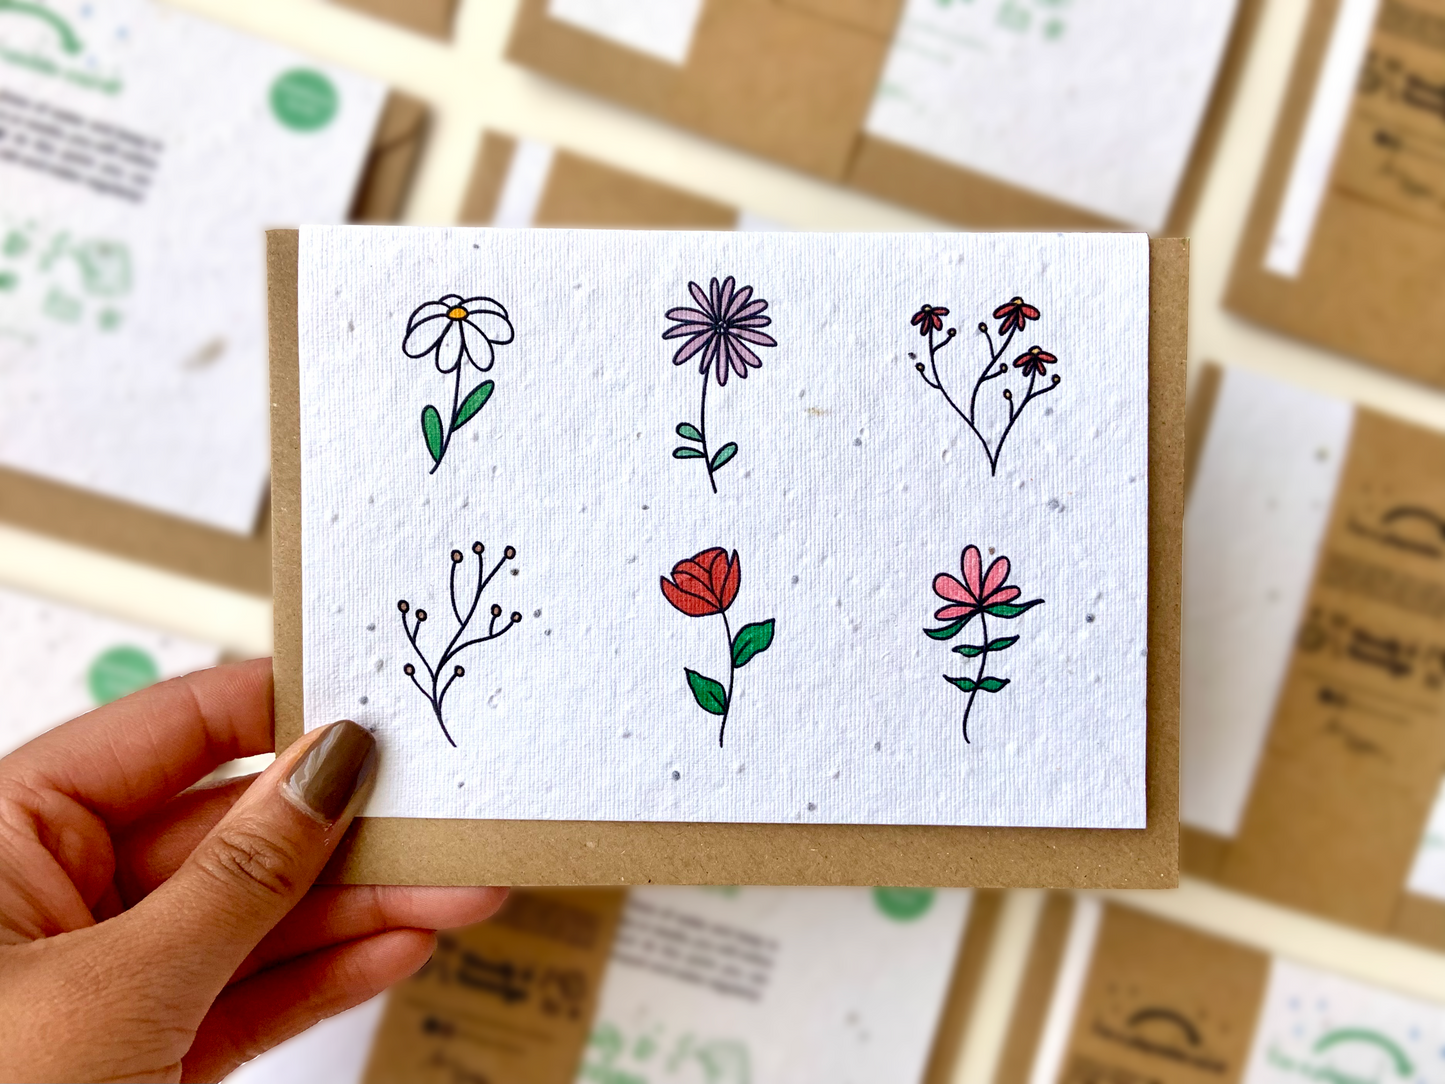 Illustrated flowers on a plantable seed wildflower greetings card